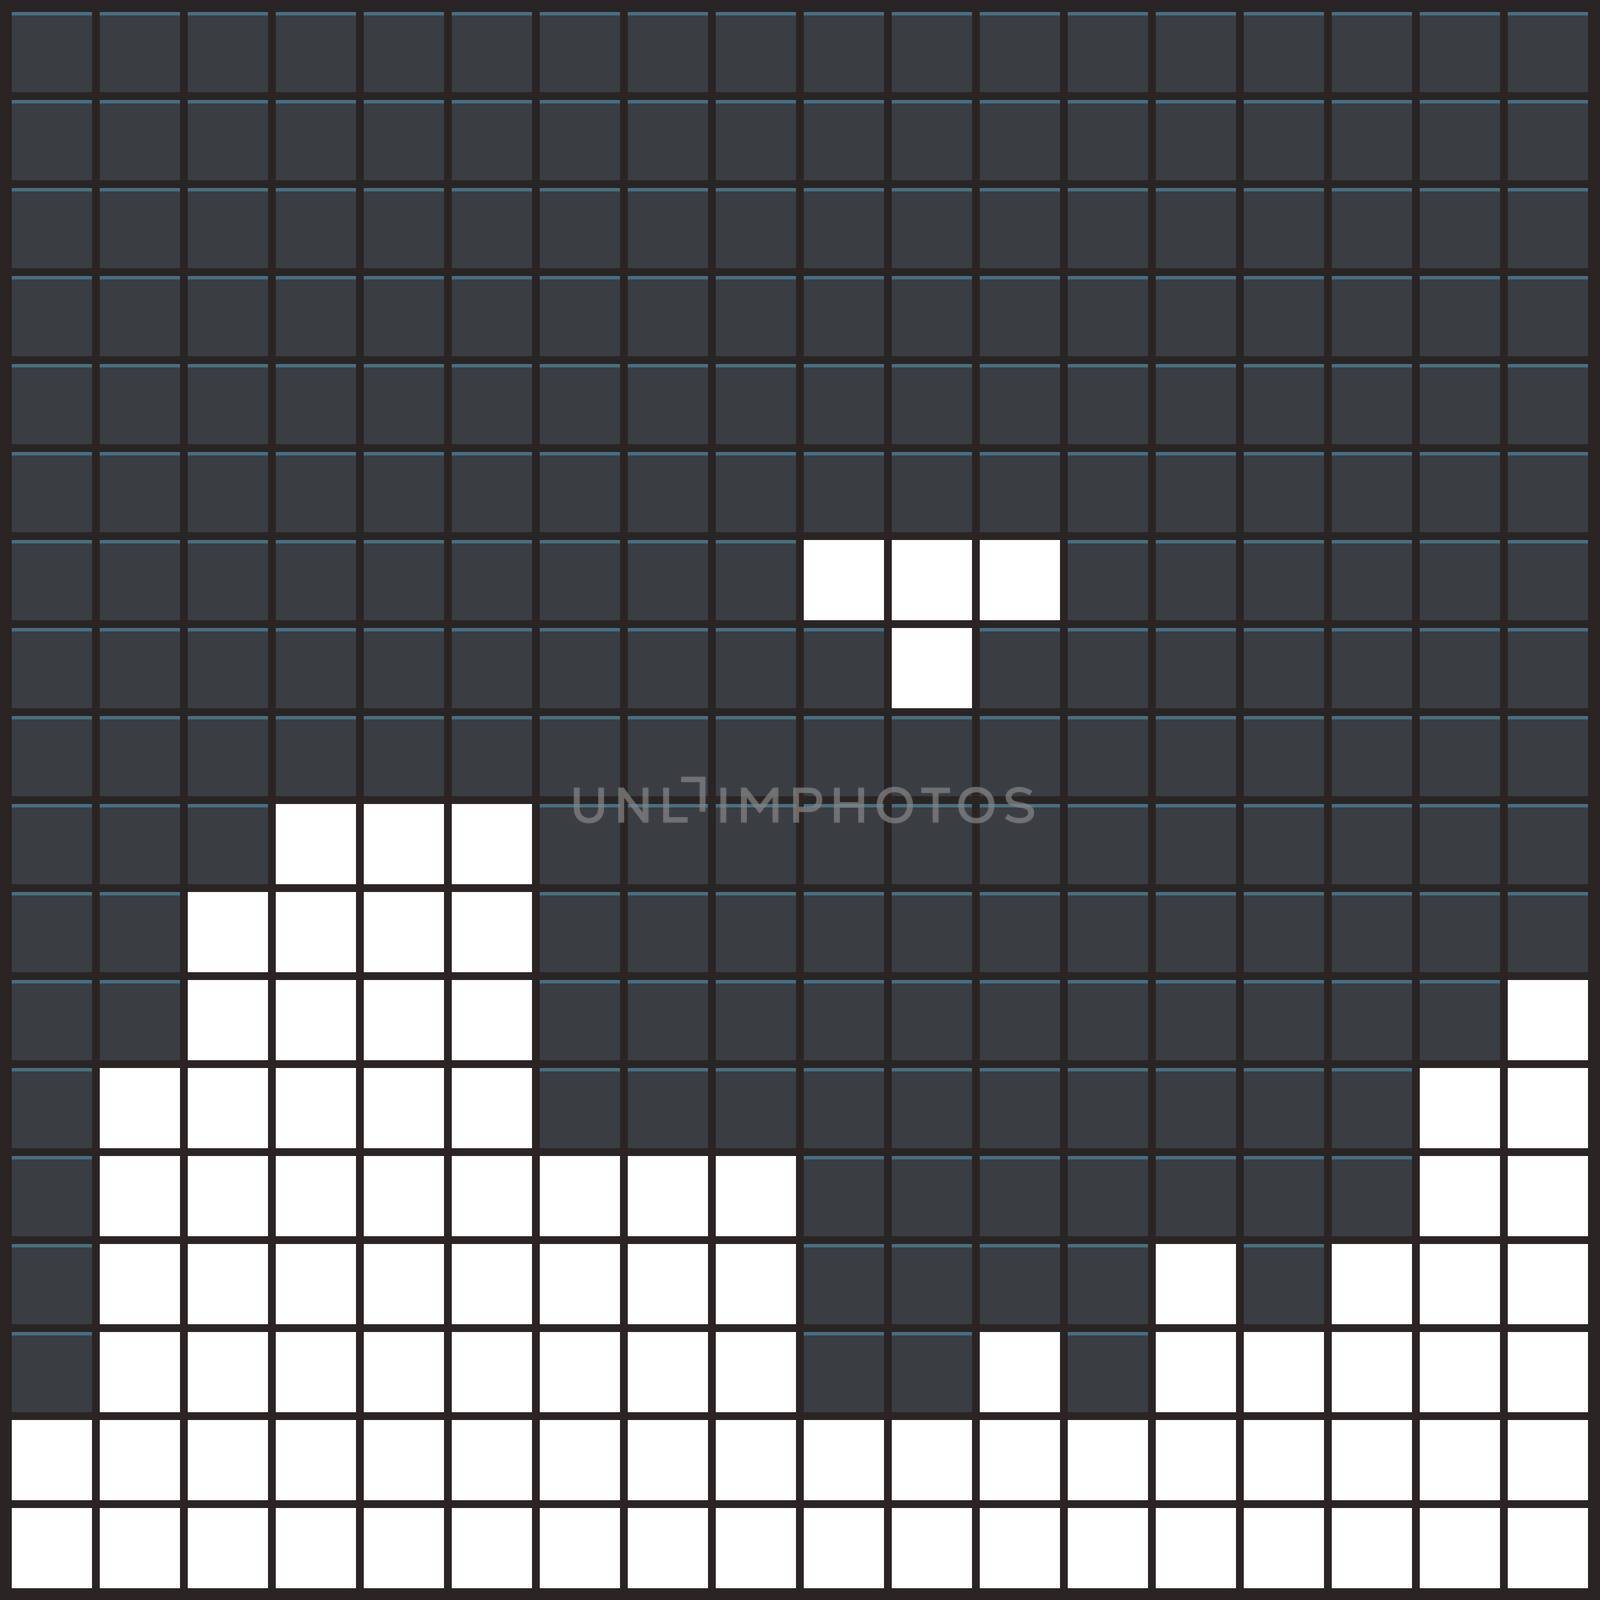 Game tetris square template. Brick game pieces. Old video game background. Vector illustration.